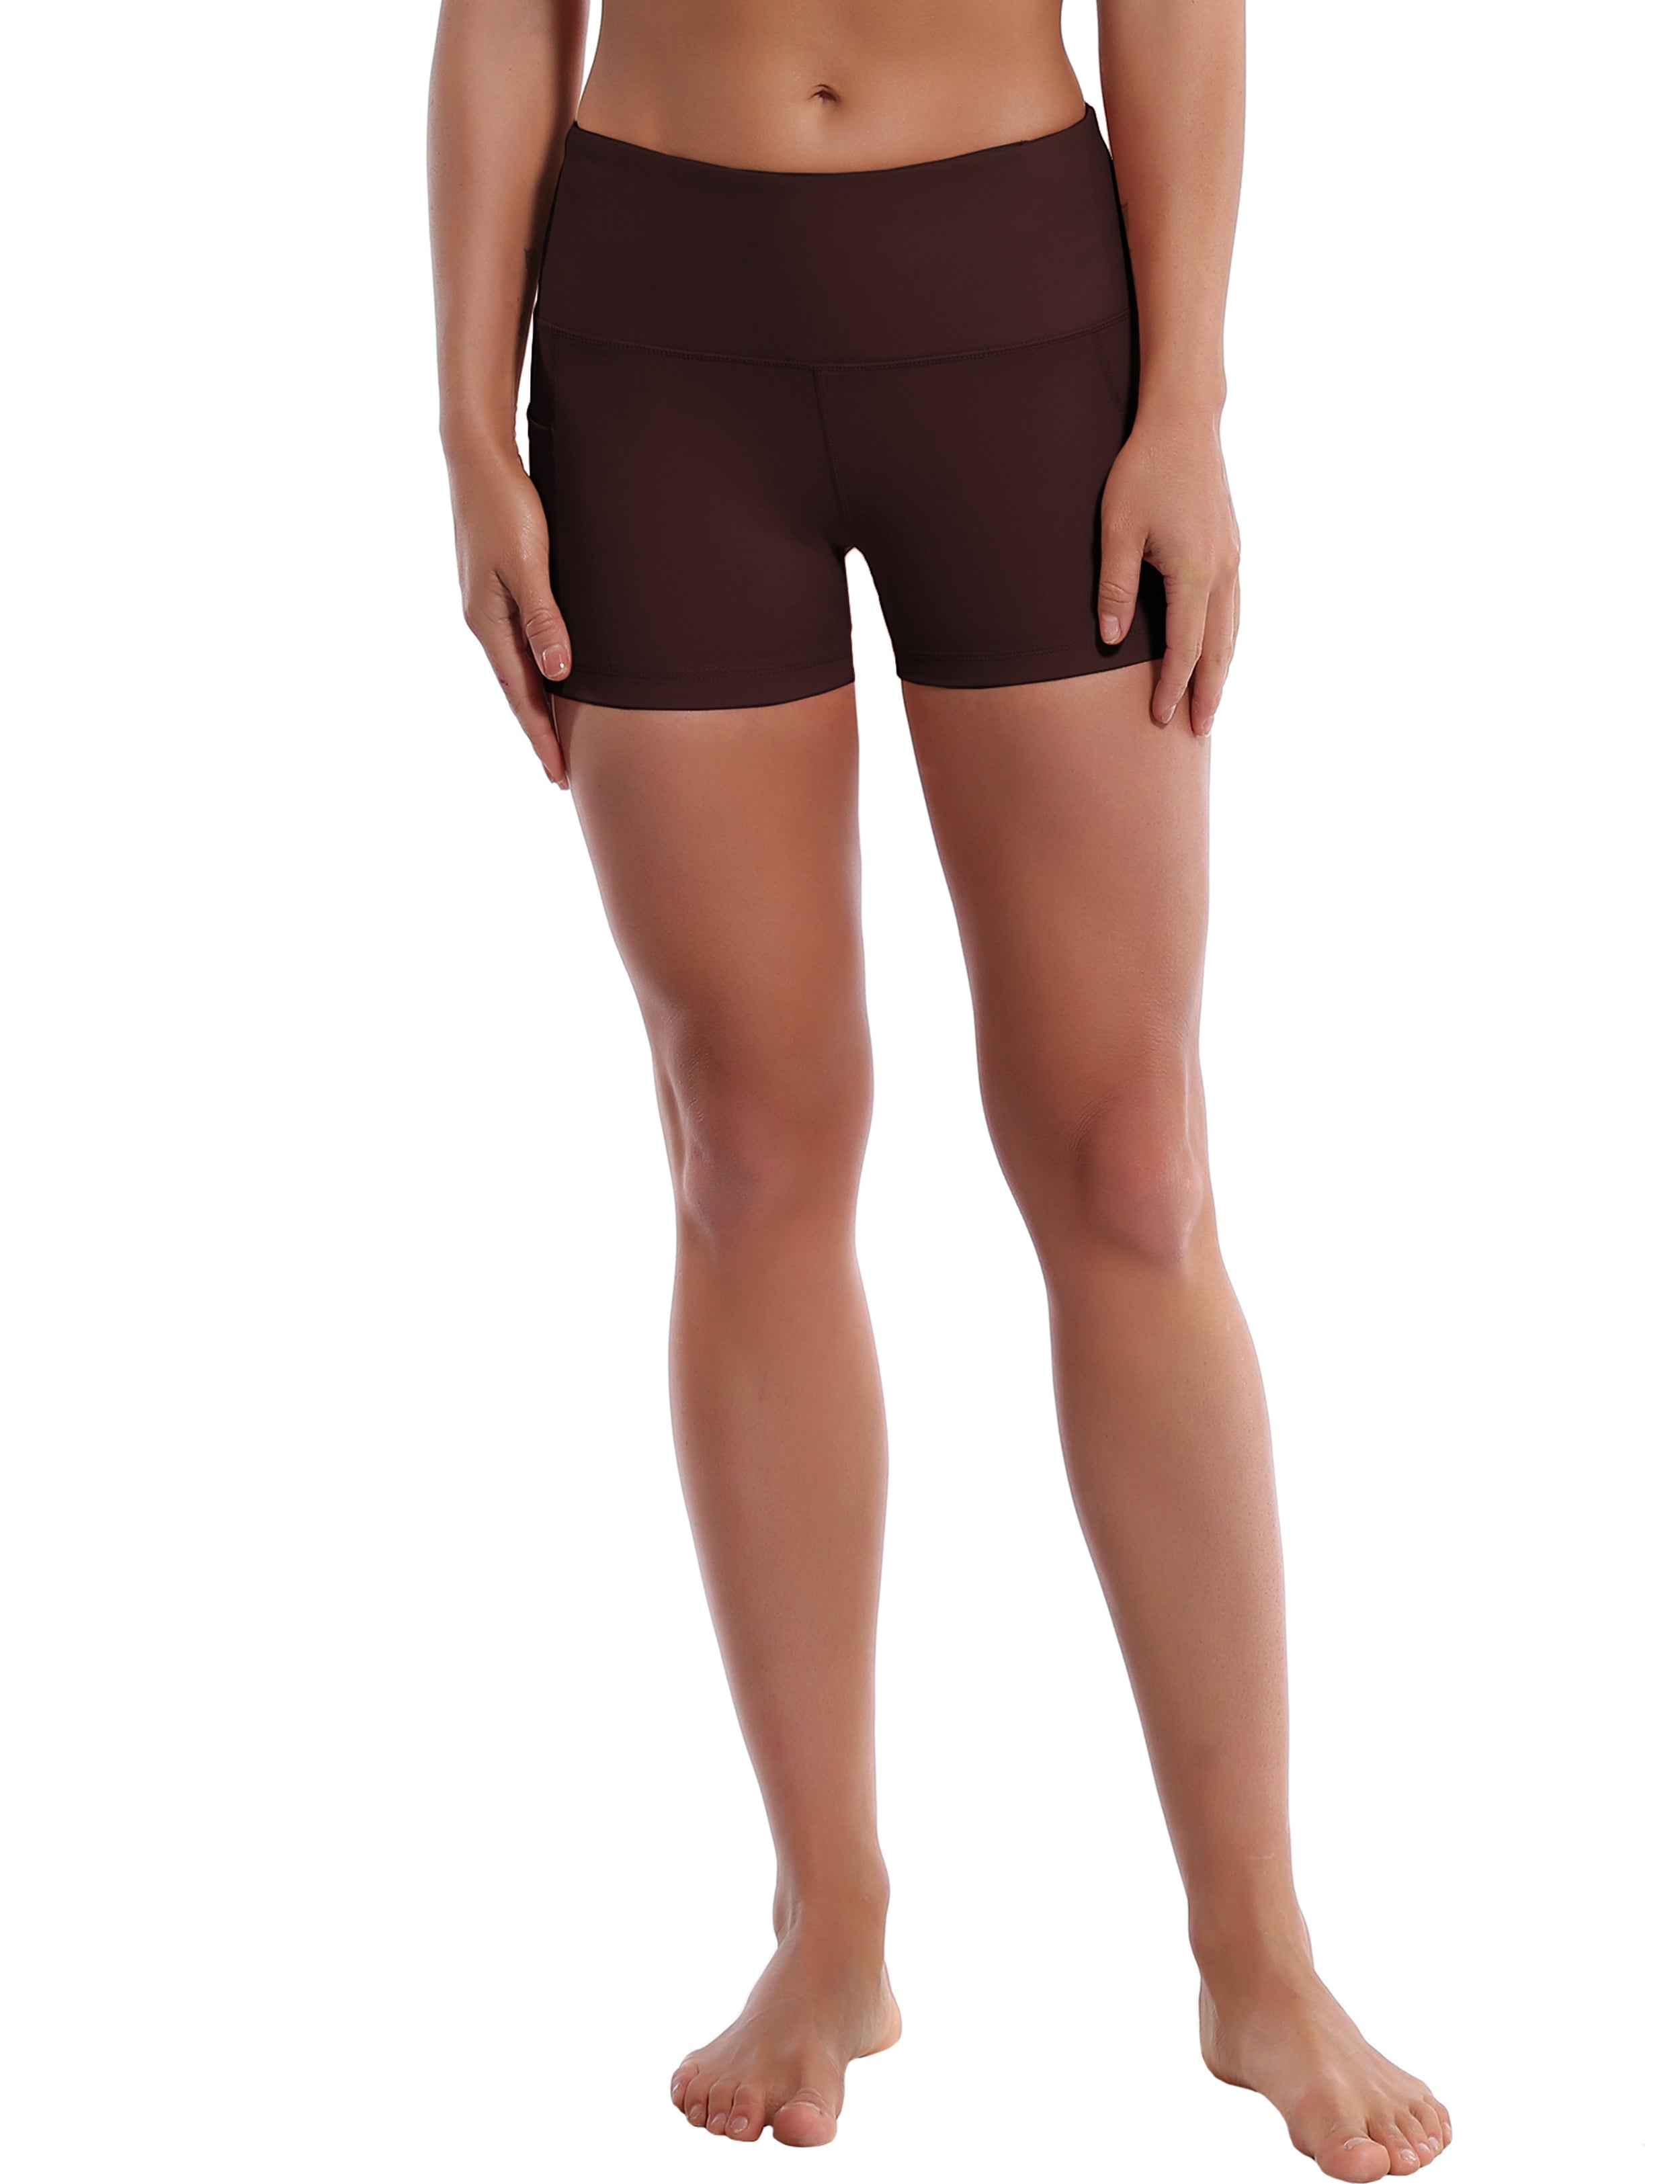 2.5" Side Pockets Running Shorts mahoganymaroon Sleek, soft, smooth and totally comfortable: our newest sexy style is here. Softest-ever fabric High elasticity High density 4-way stretch Fabric doesn't attract lint easily No see-through Moisture-wicking Machine wash 78% Polyester, 22% Spandex